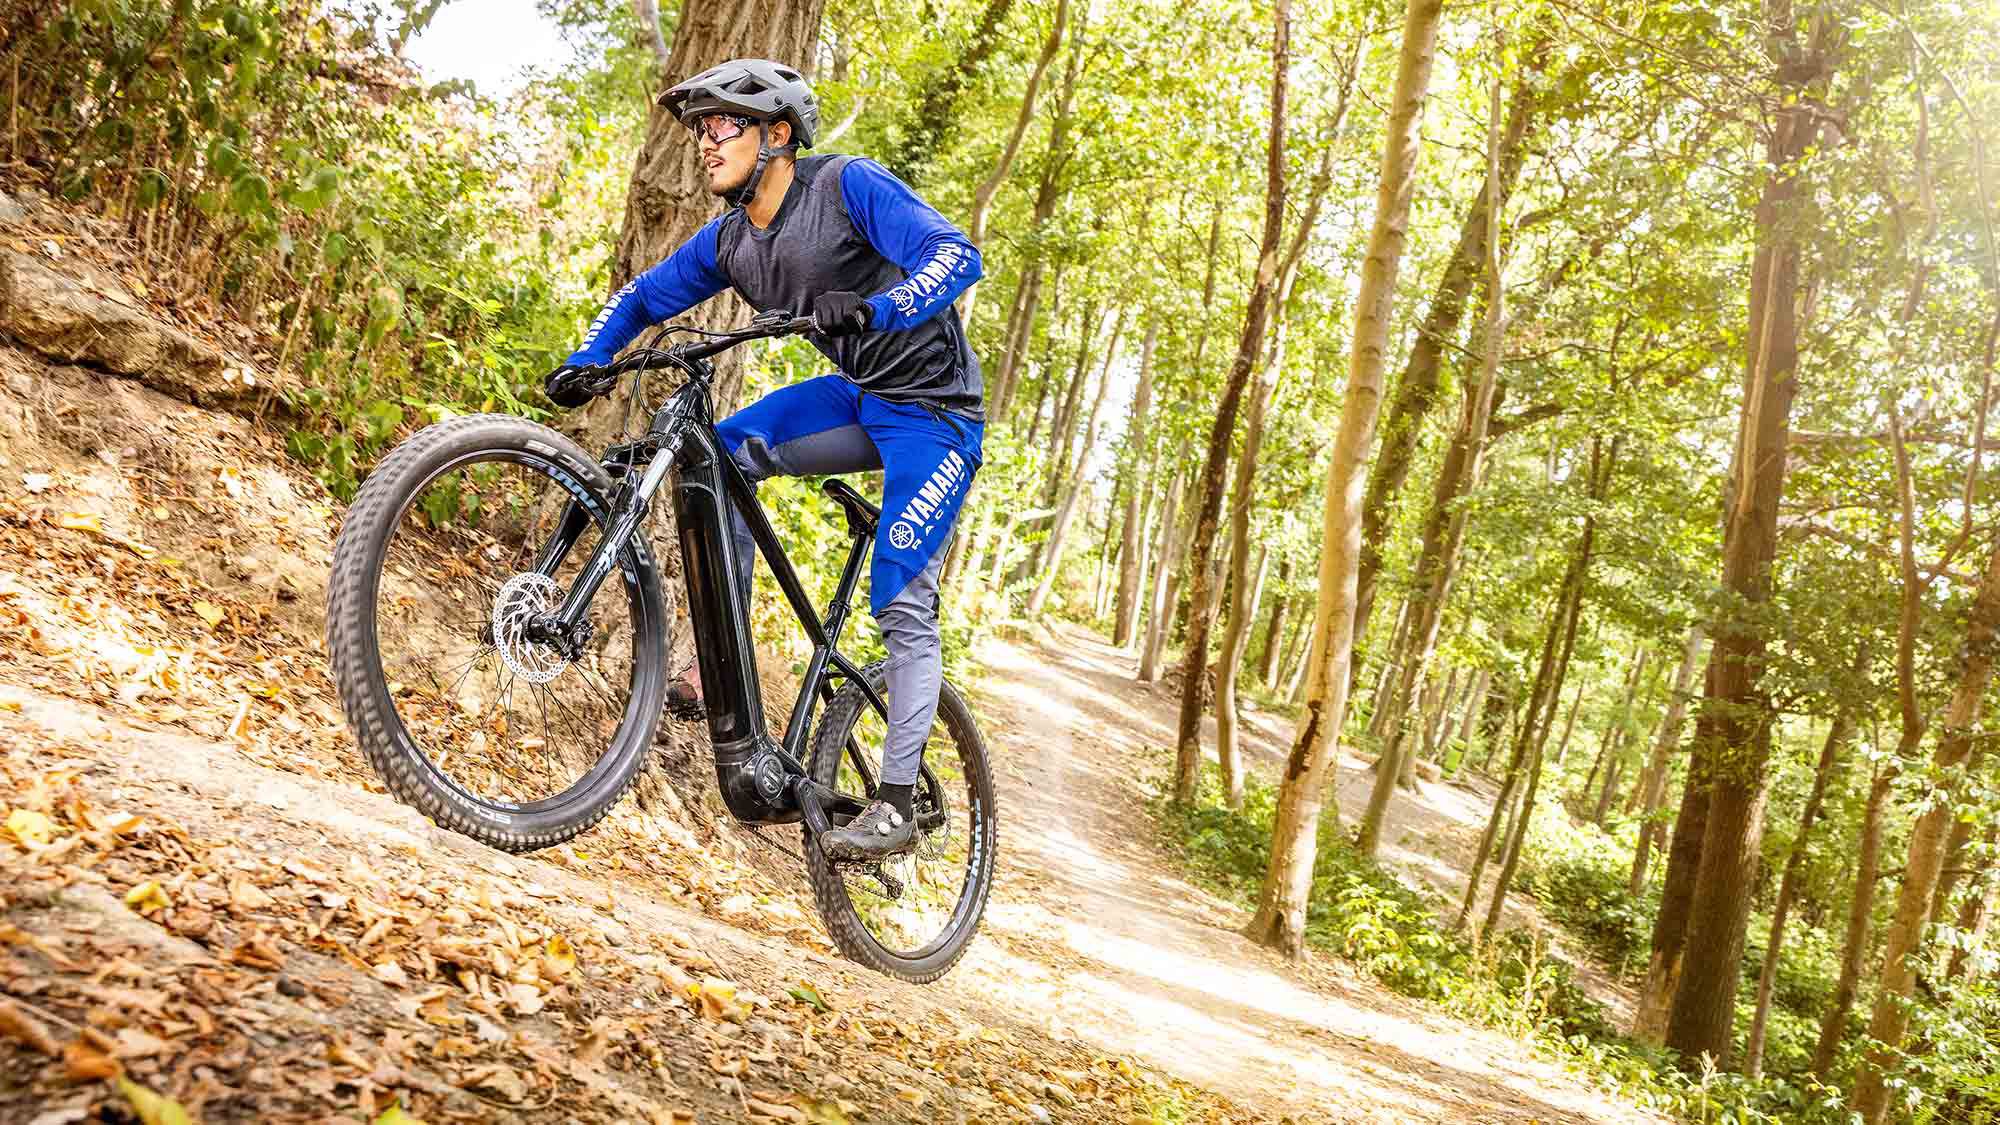 Mountain bike and other sport riders will appreciate the improved design and performance of the PWseries S2.